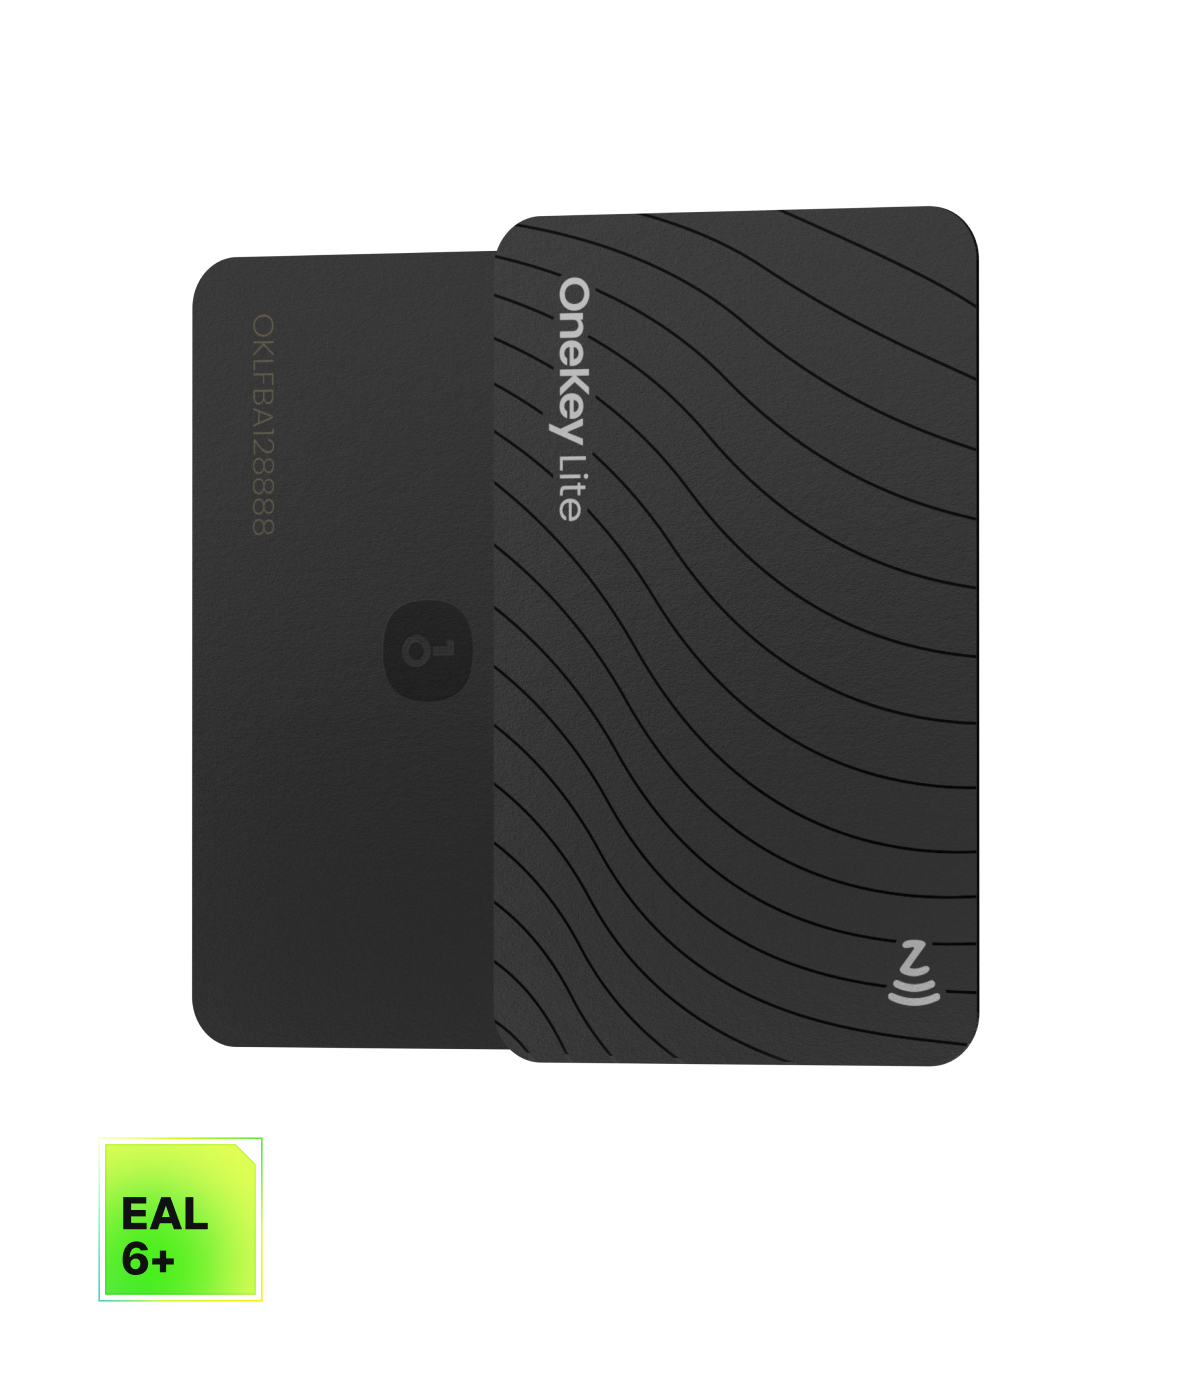 OneKey Lite - Recovery Phrase Backup Card